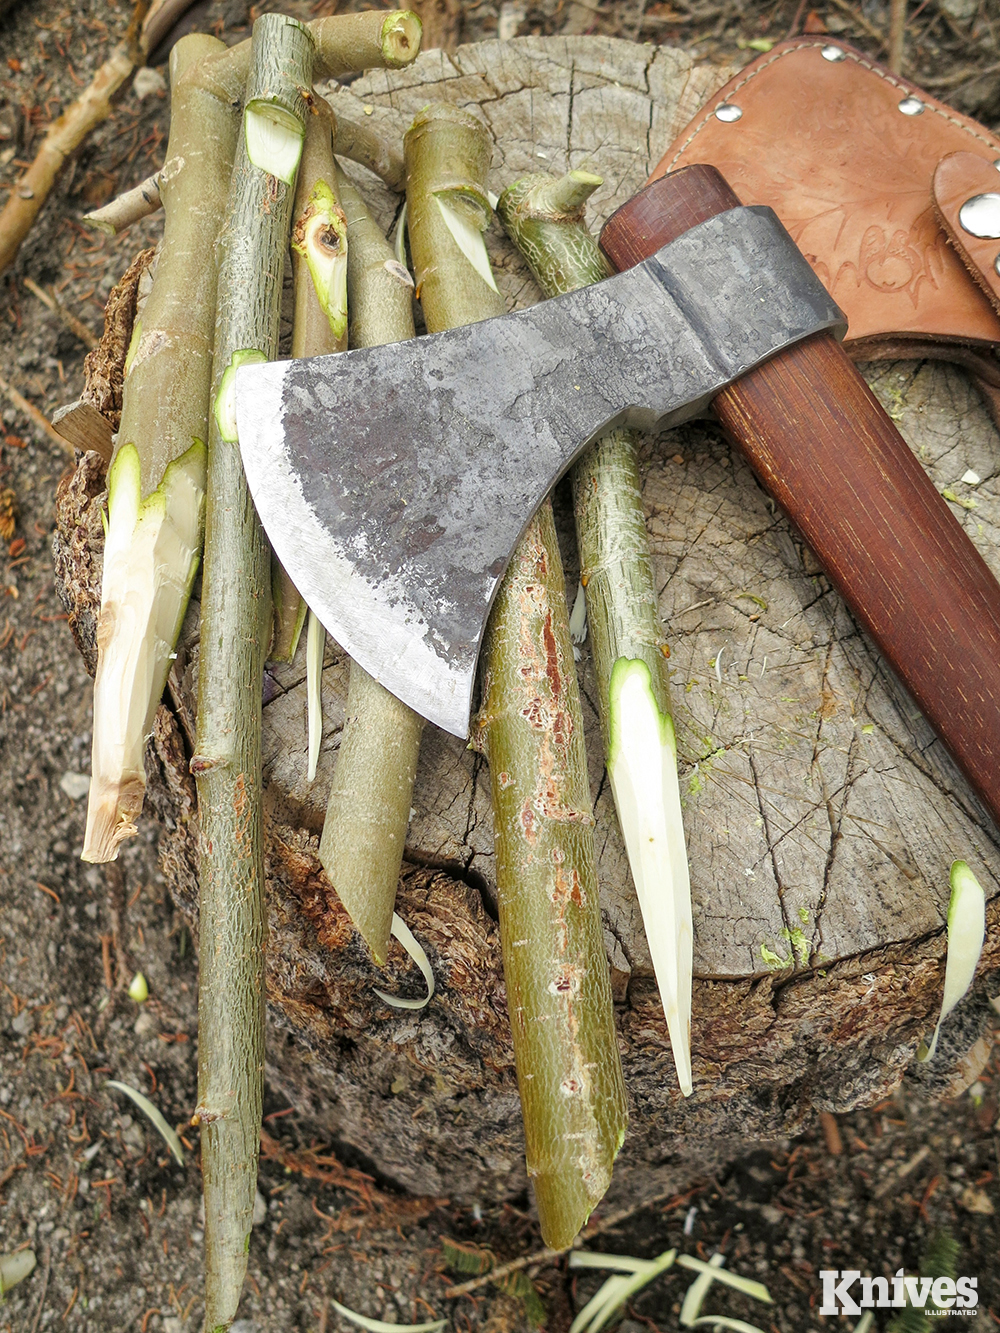 A tomahawk can easily make quick, expedient stakes for anchoring down cooking setups, tarps, and tents.